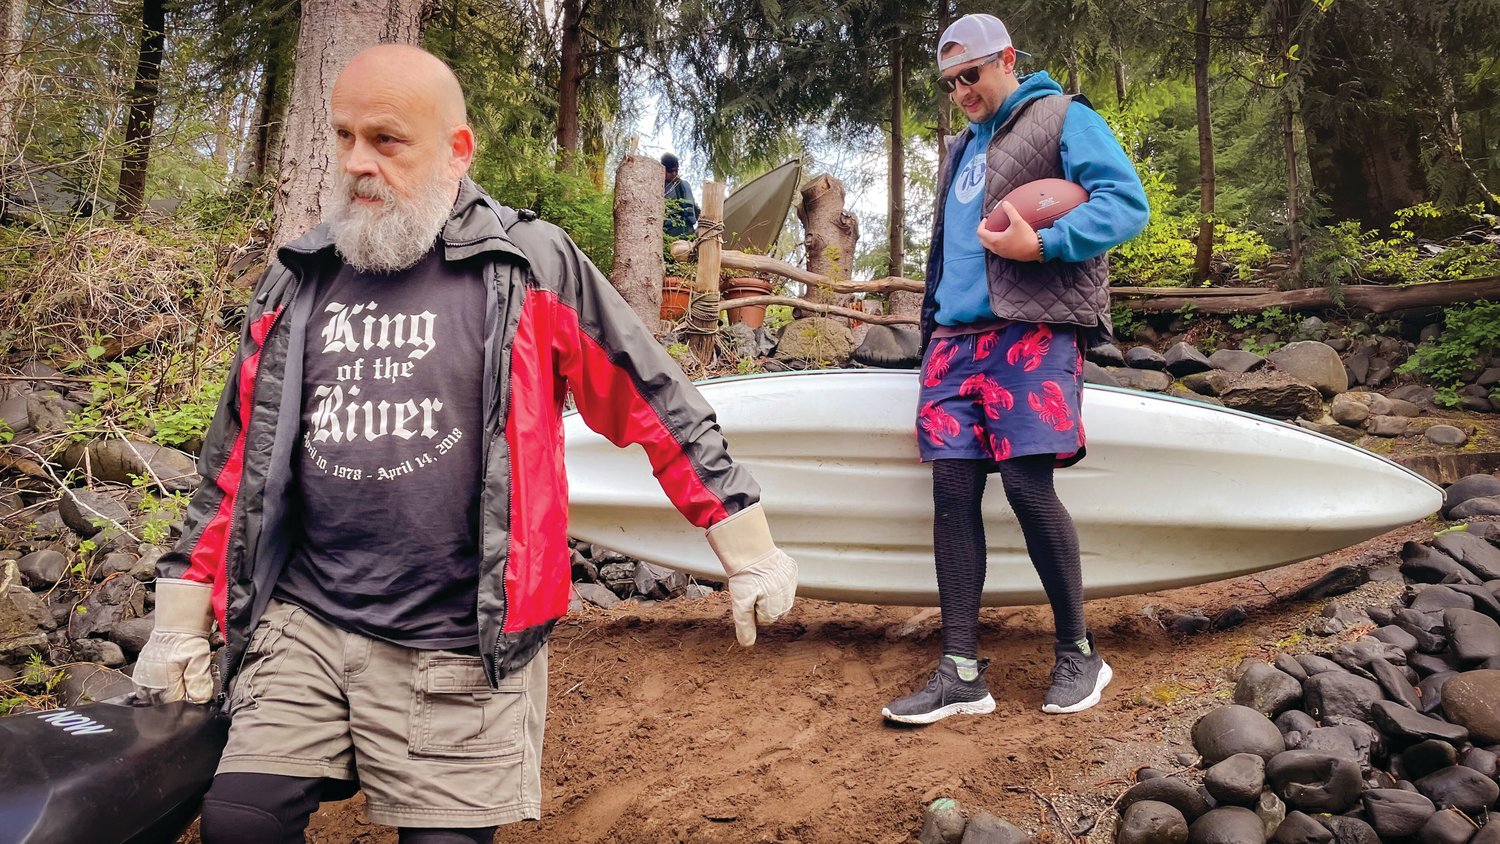 Jim Merrill, left, sports a shirt that reads, “King of the River,” during the Pe Ell River Run as he helps carry kayaks down to the Chehalis on Saturday.